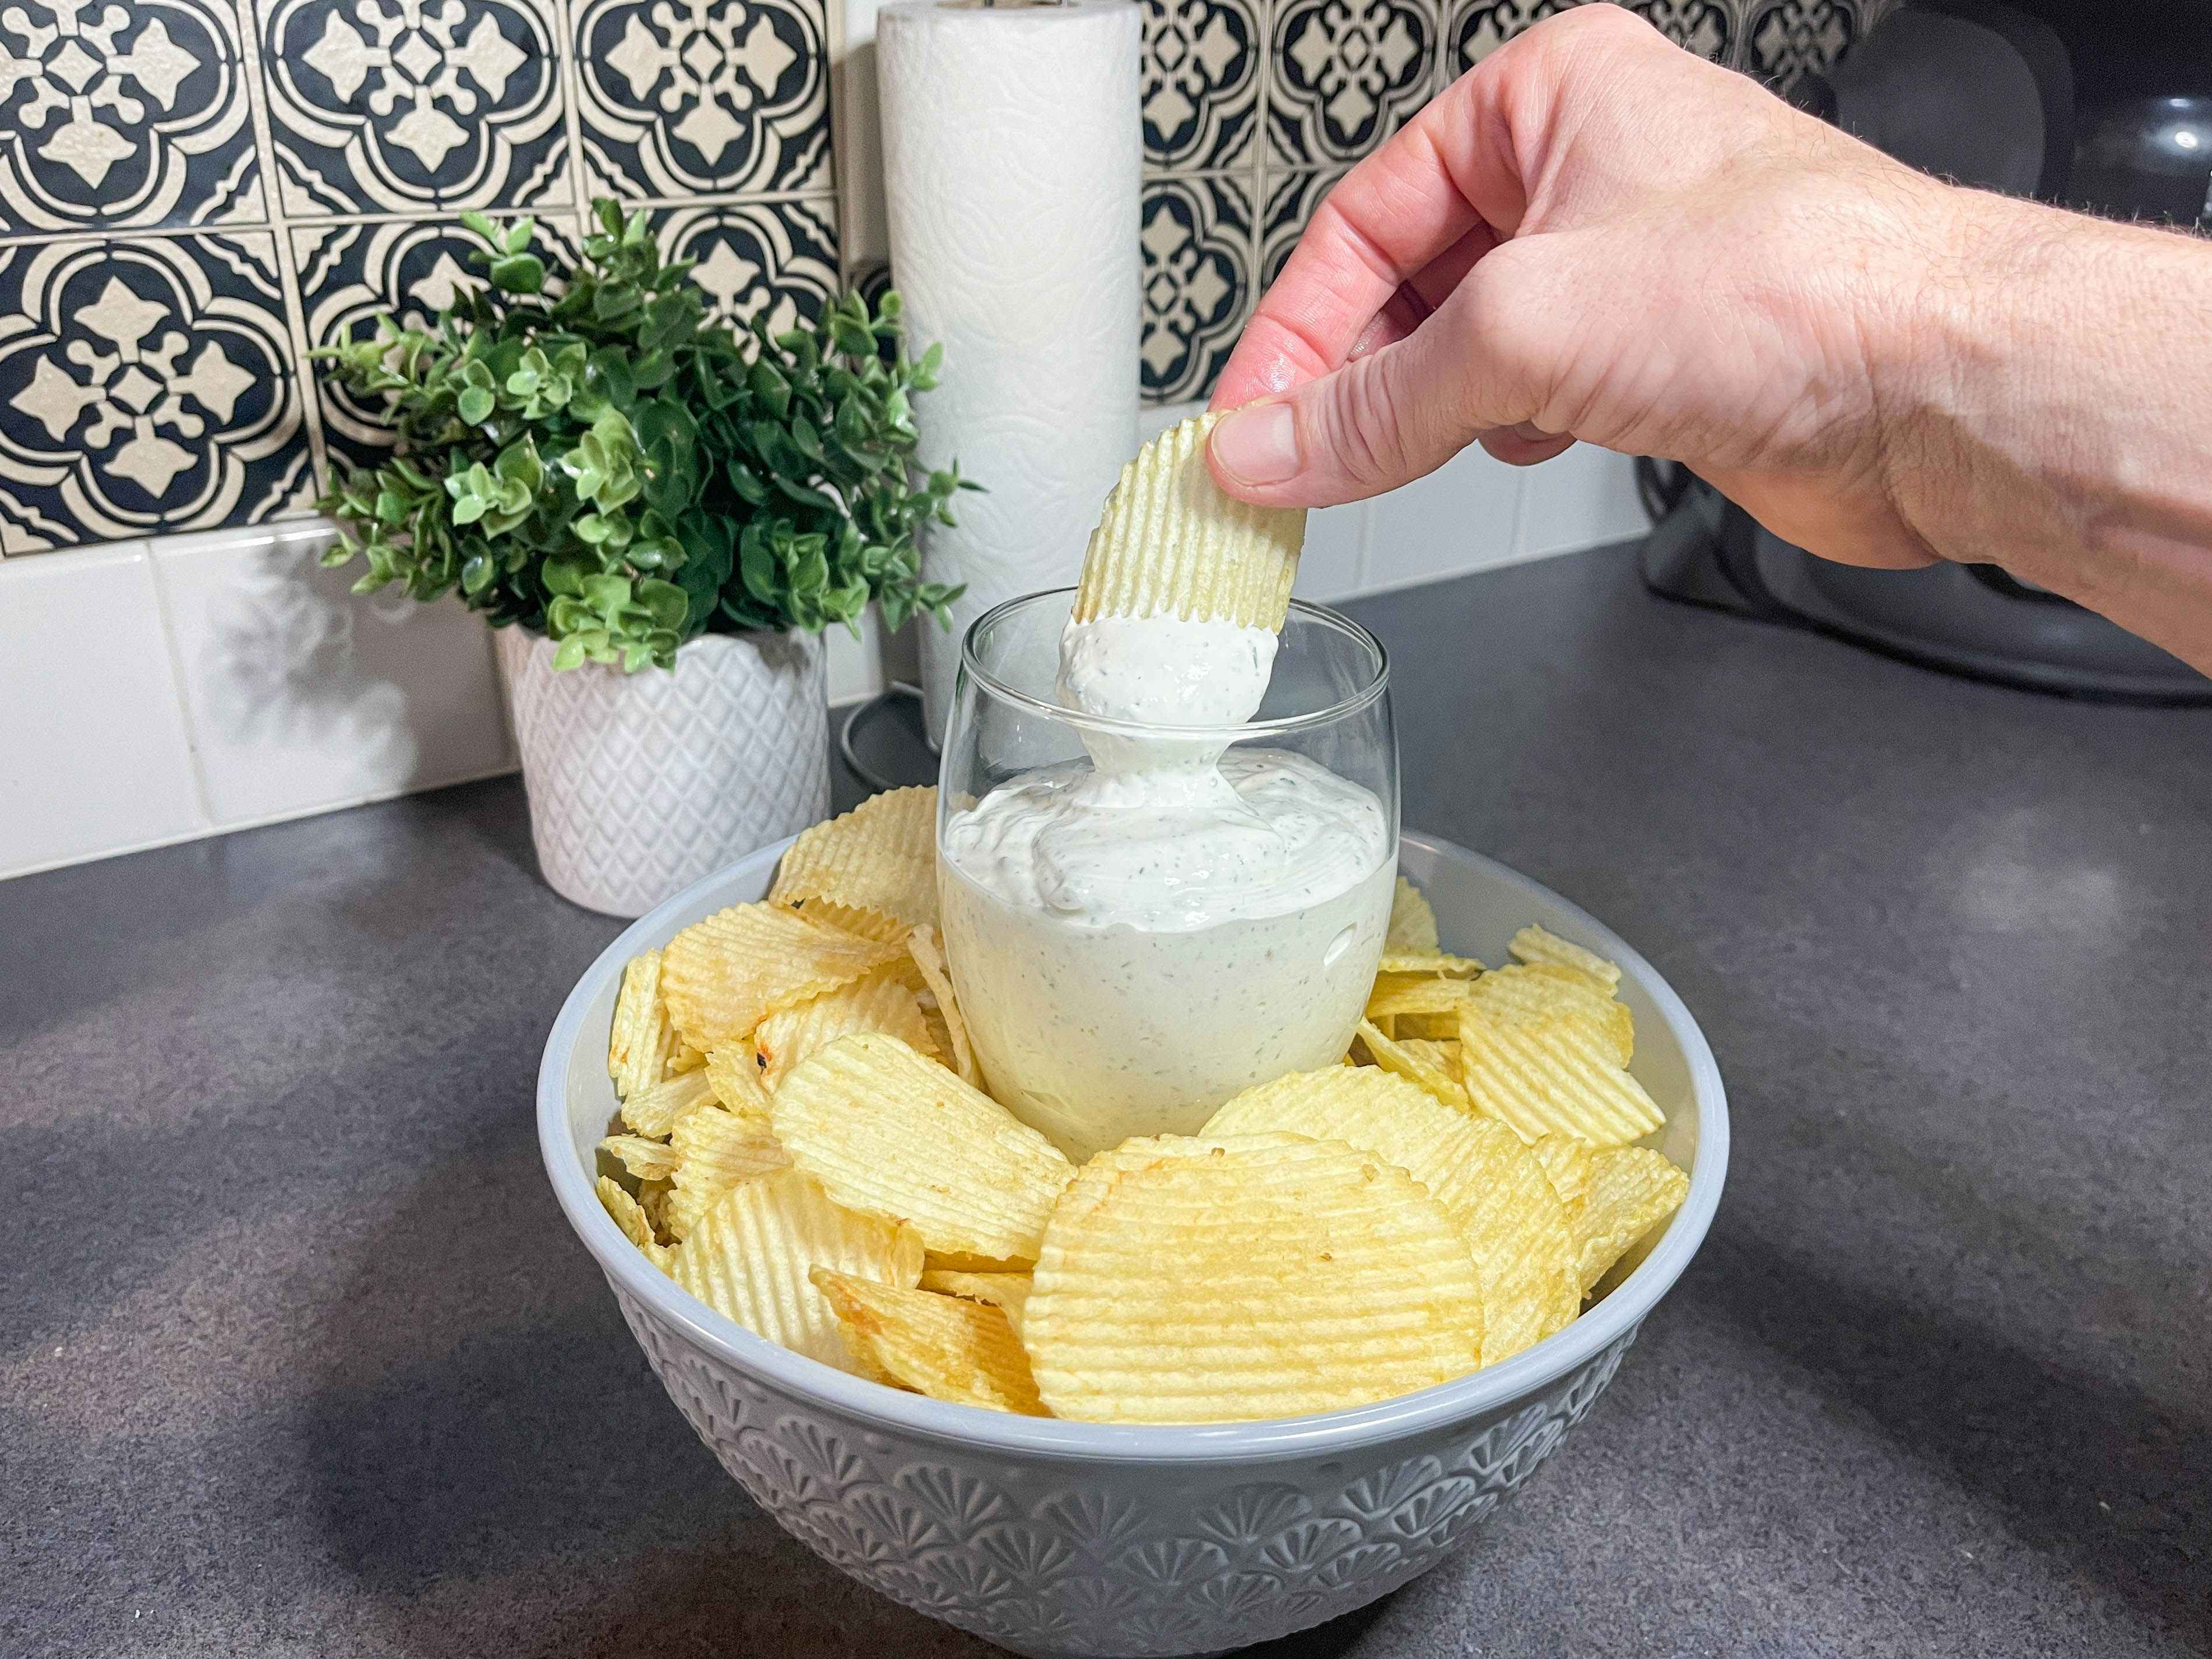 a hand dipping a chip into ranch dip from a wine glass filled with dip 